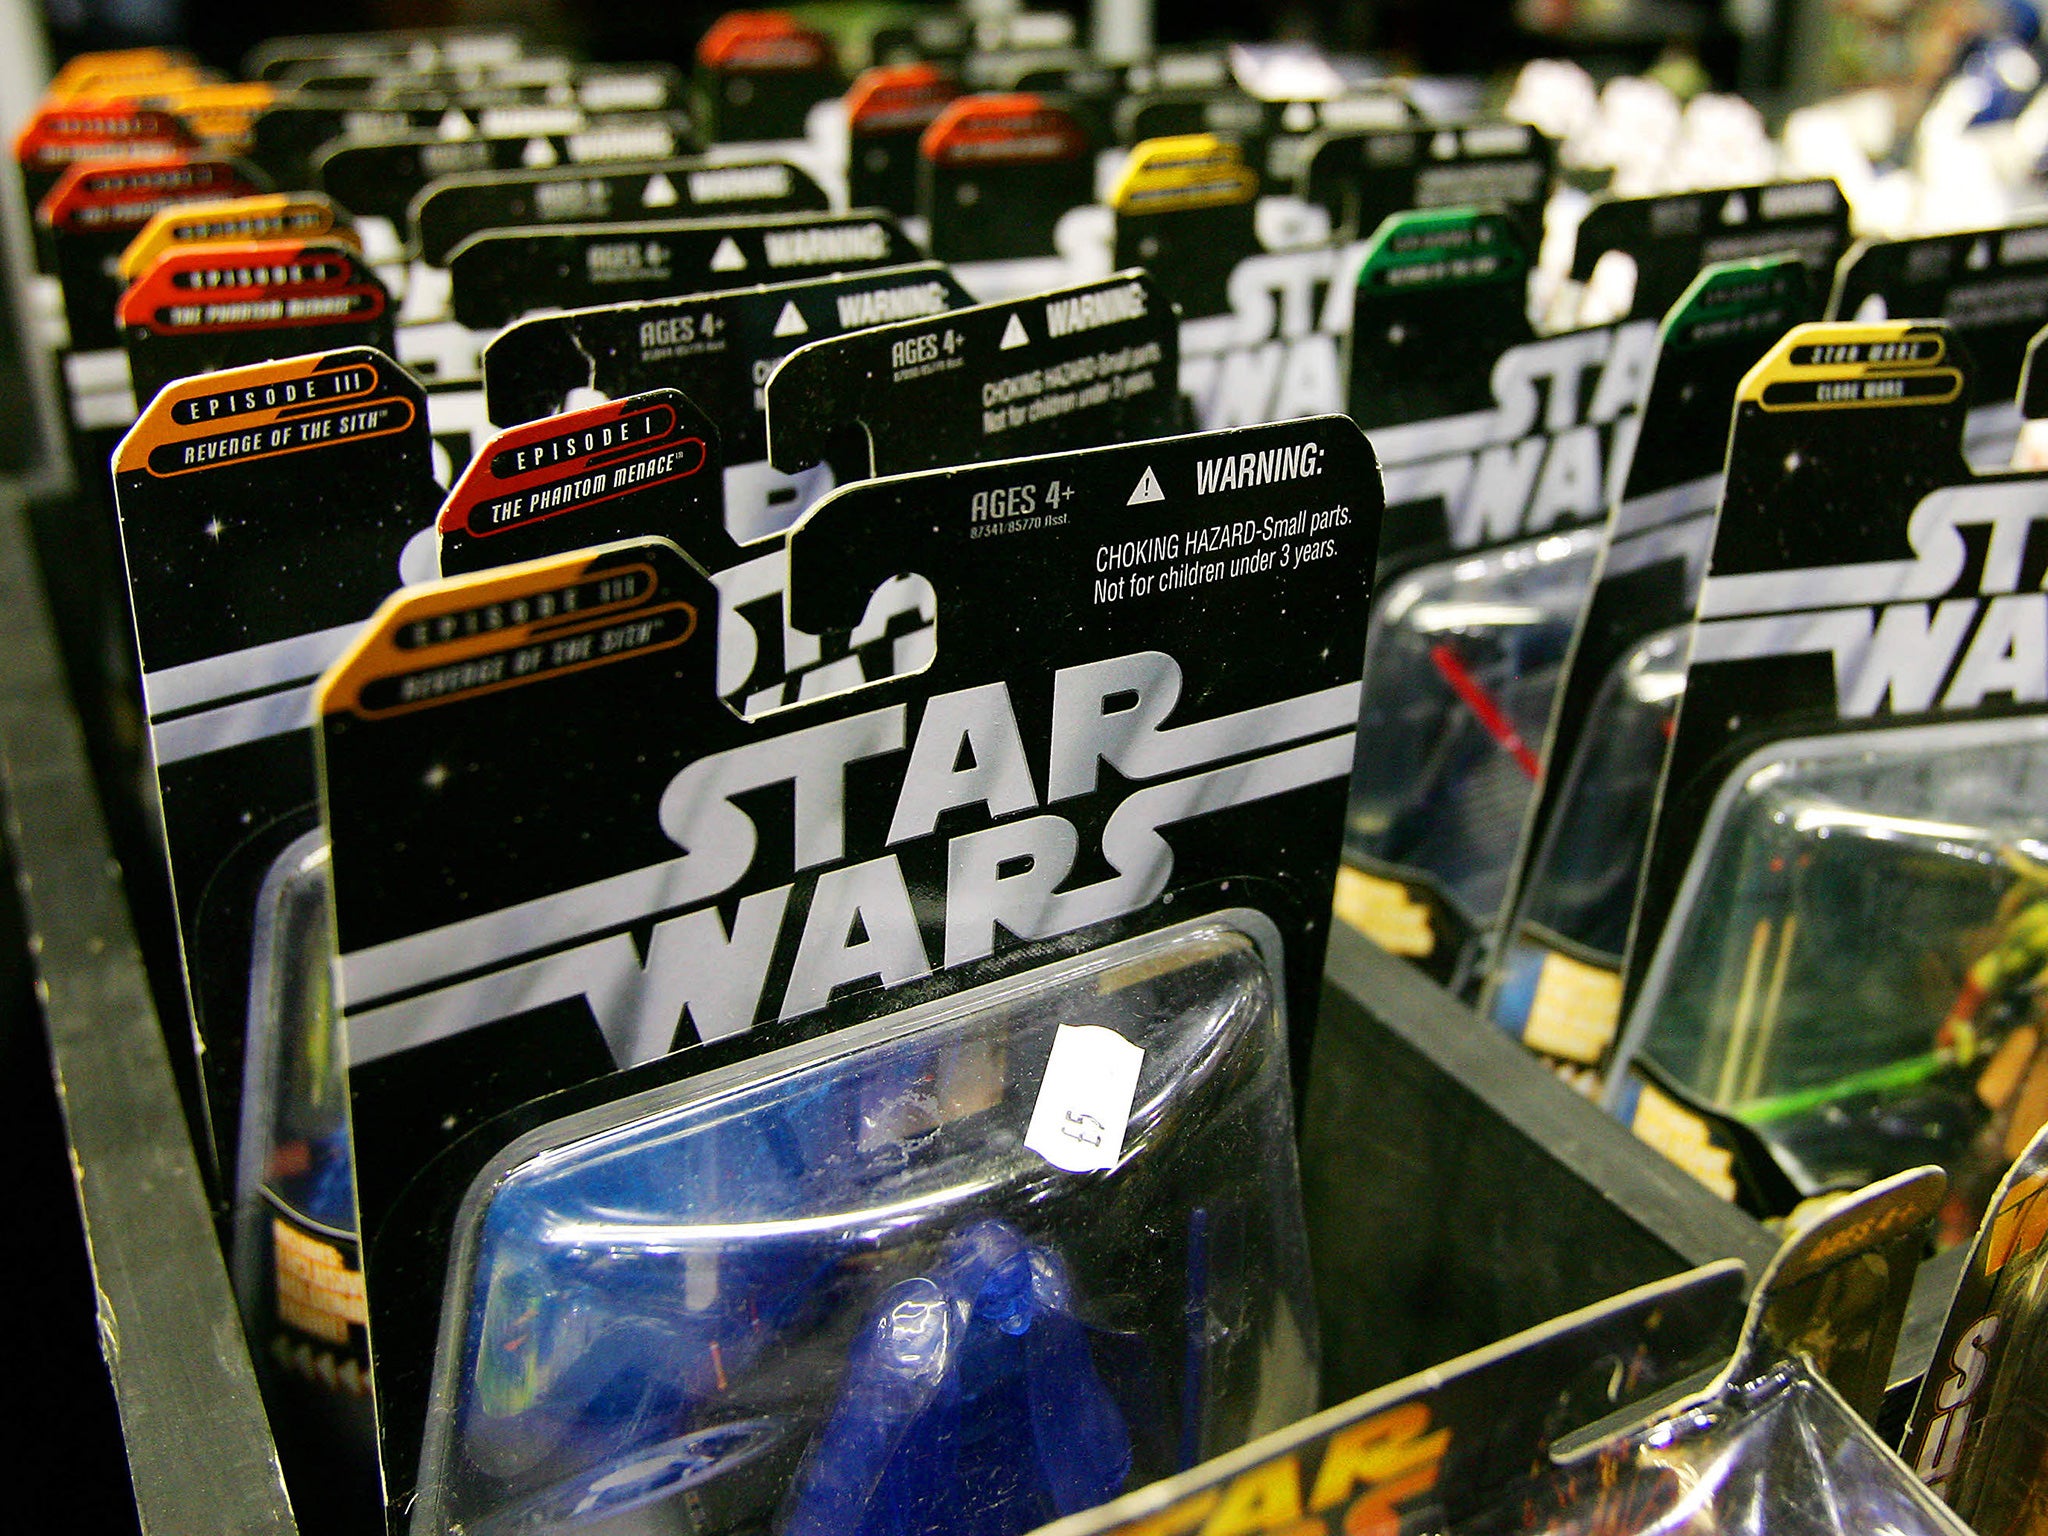 Star Wars science fiction film merchandise is seen on display at a stall at the Star Wars Celebration Europe event in London